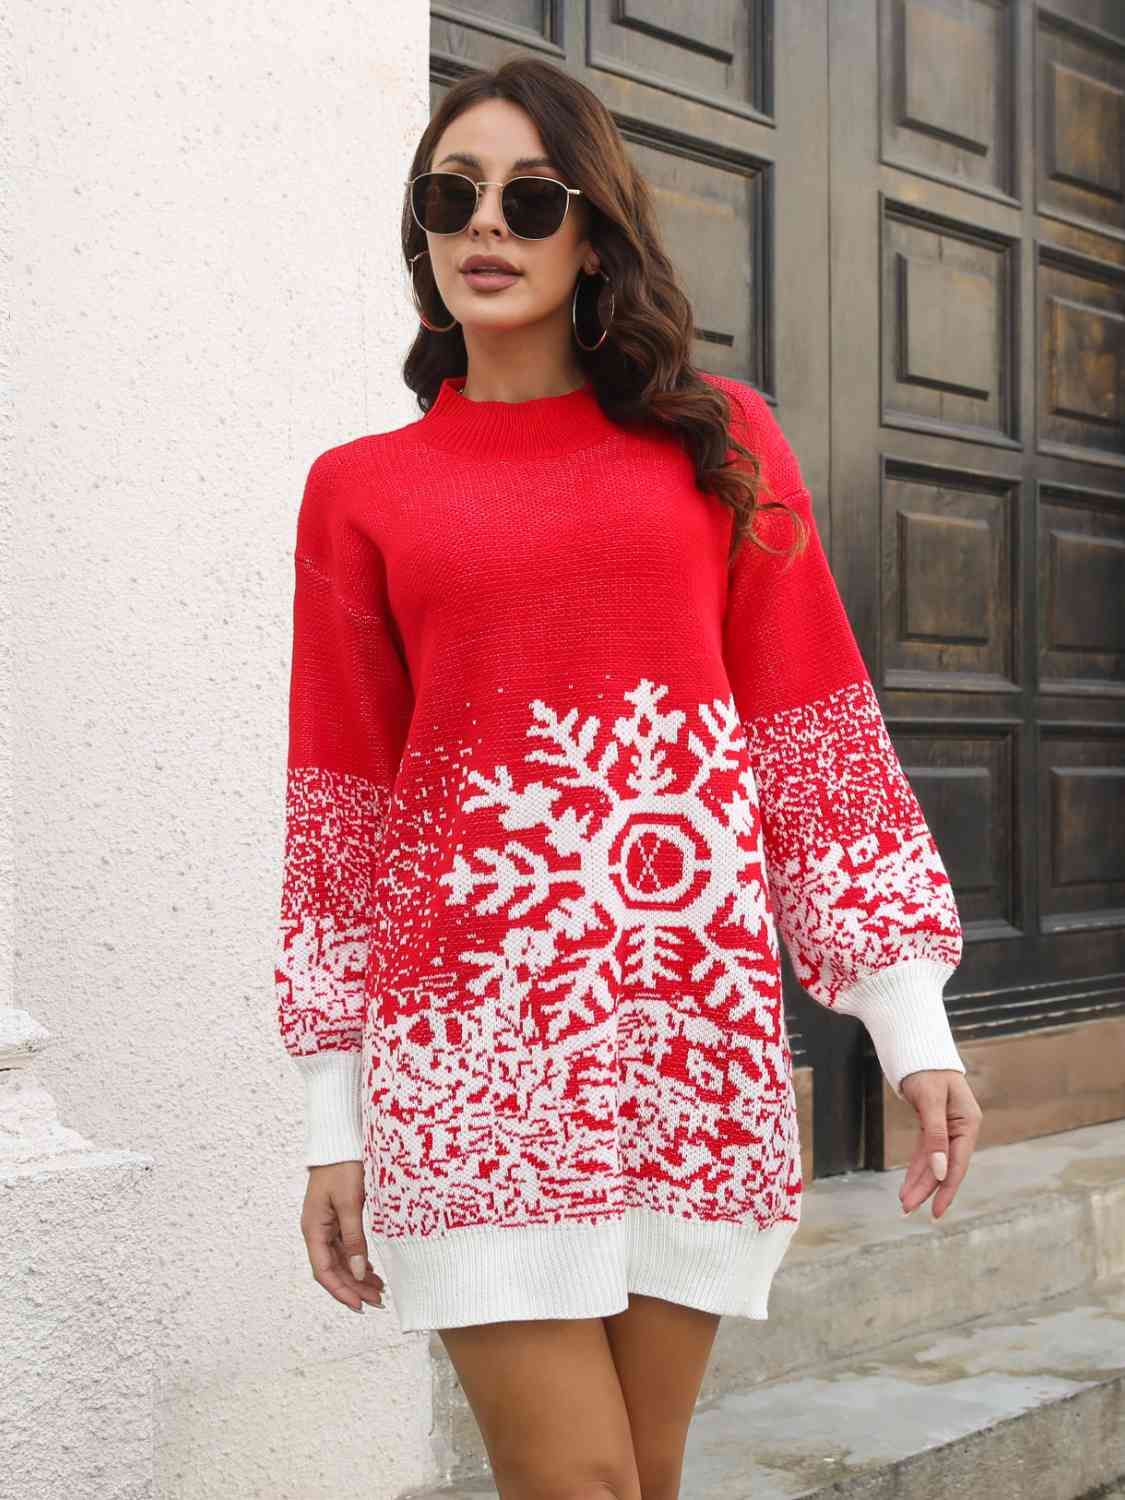 Cupid Beauty Supplies Cupid Beauty Supplies Red / S Sweater Dress Snowflake Sweater Dress: Cozy & Cute For Winter